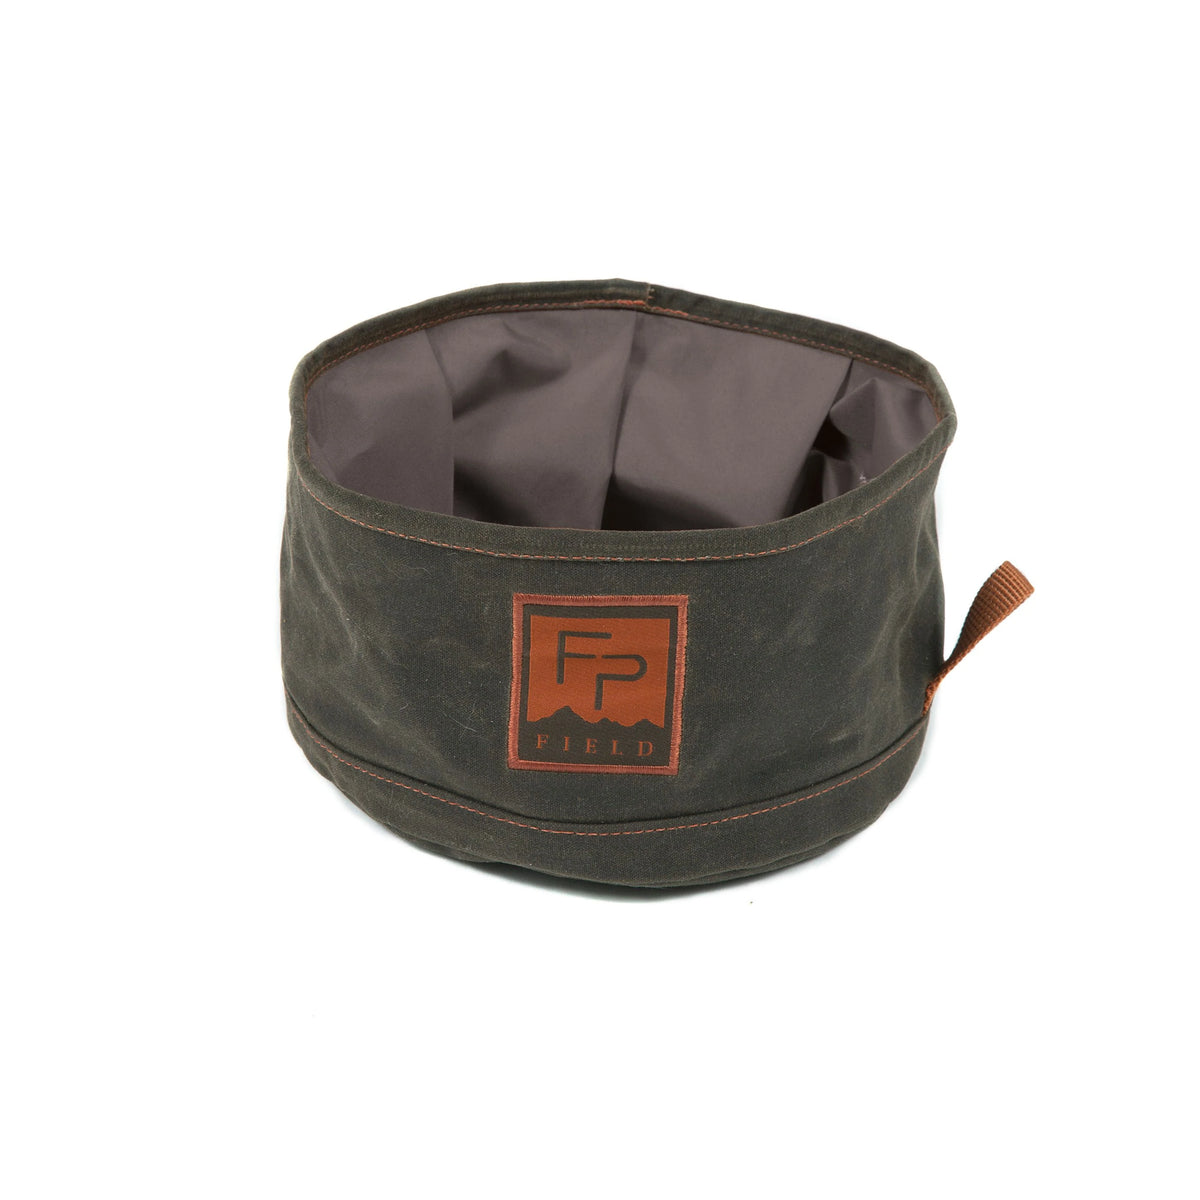 Fishpond - Bow Wow Travel Water Bowl - Peat Moss